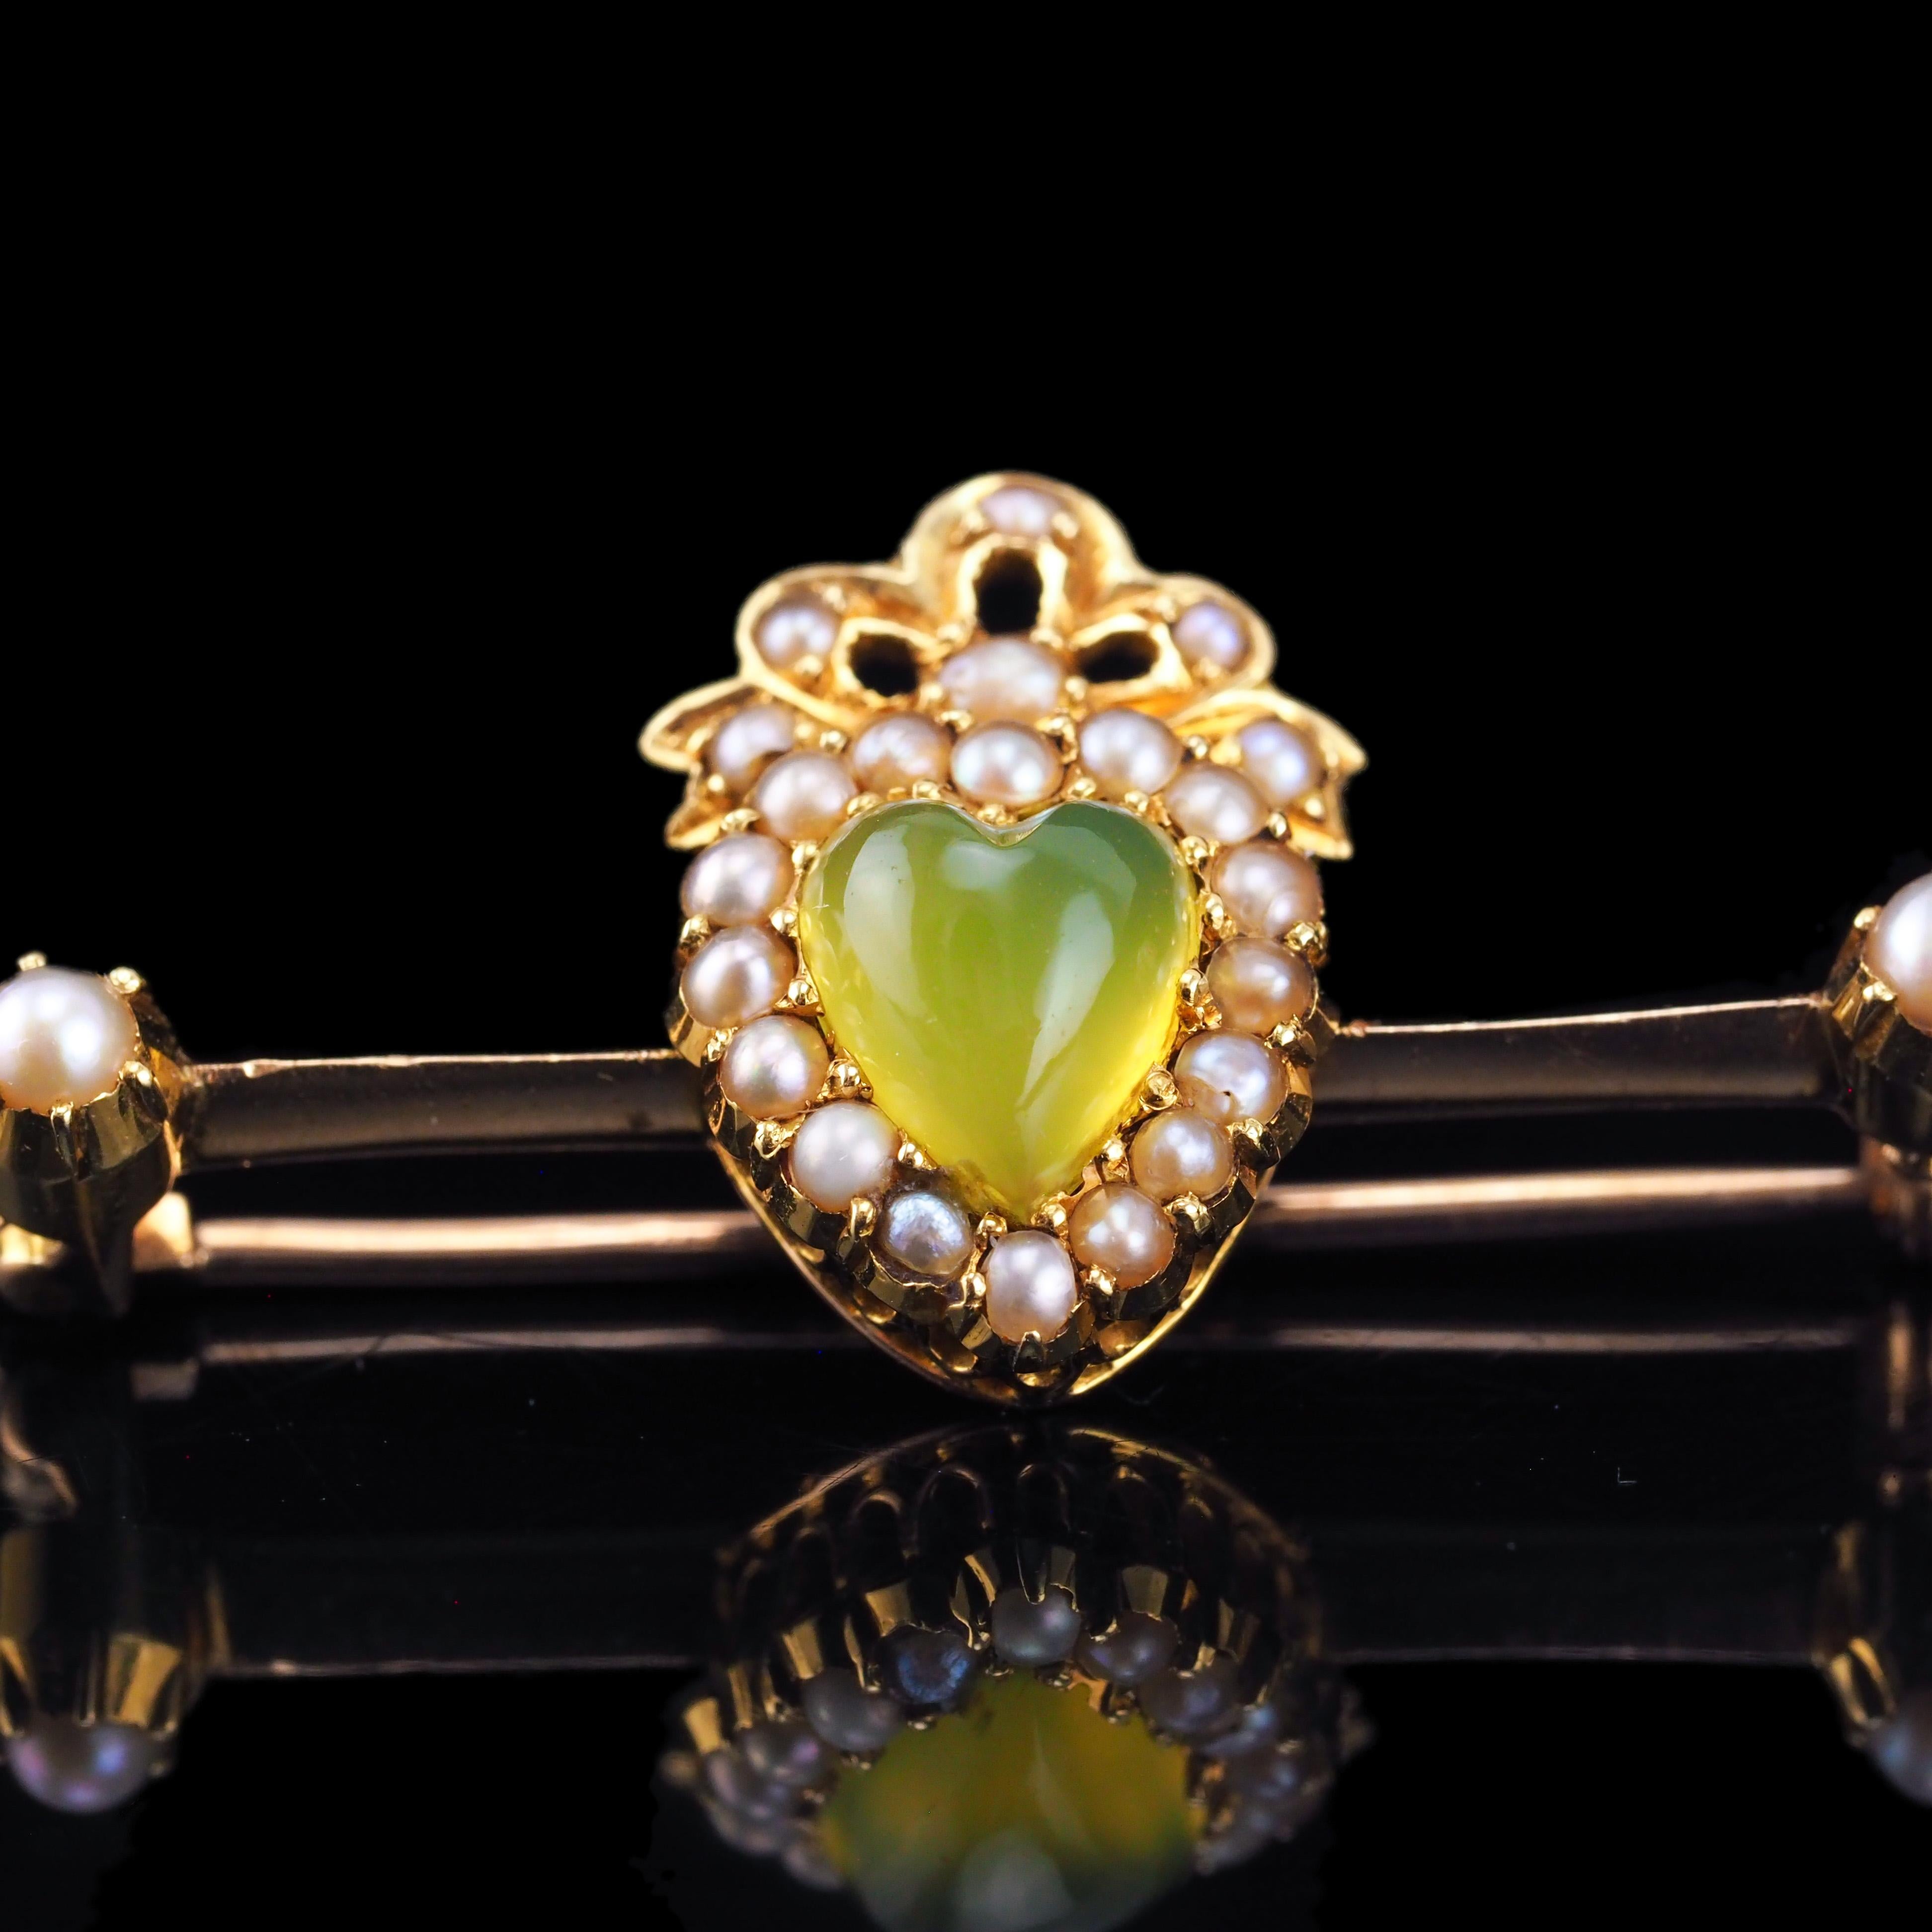 Antique Victorian Chalcedony Brooch  Seed Pearls 15K Gold Heart Shaped c.1890 For Sale 3